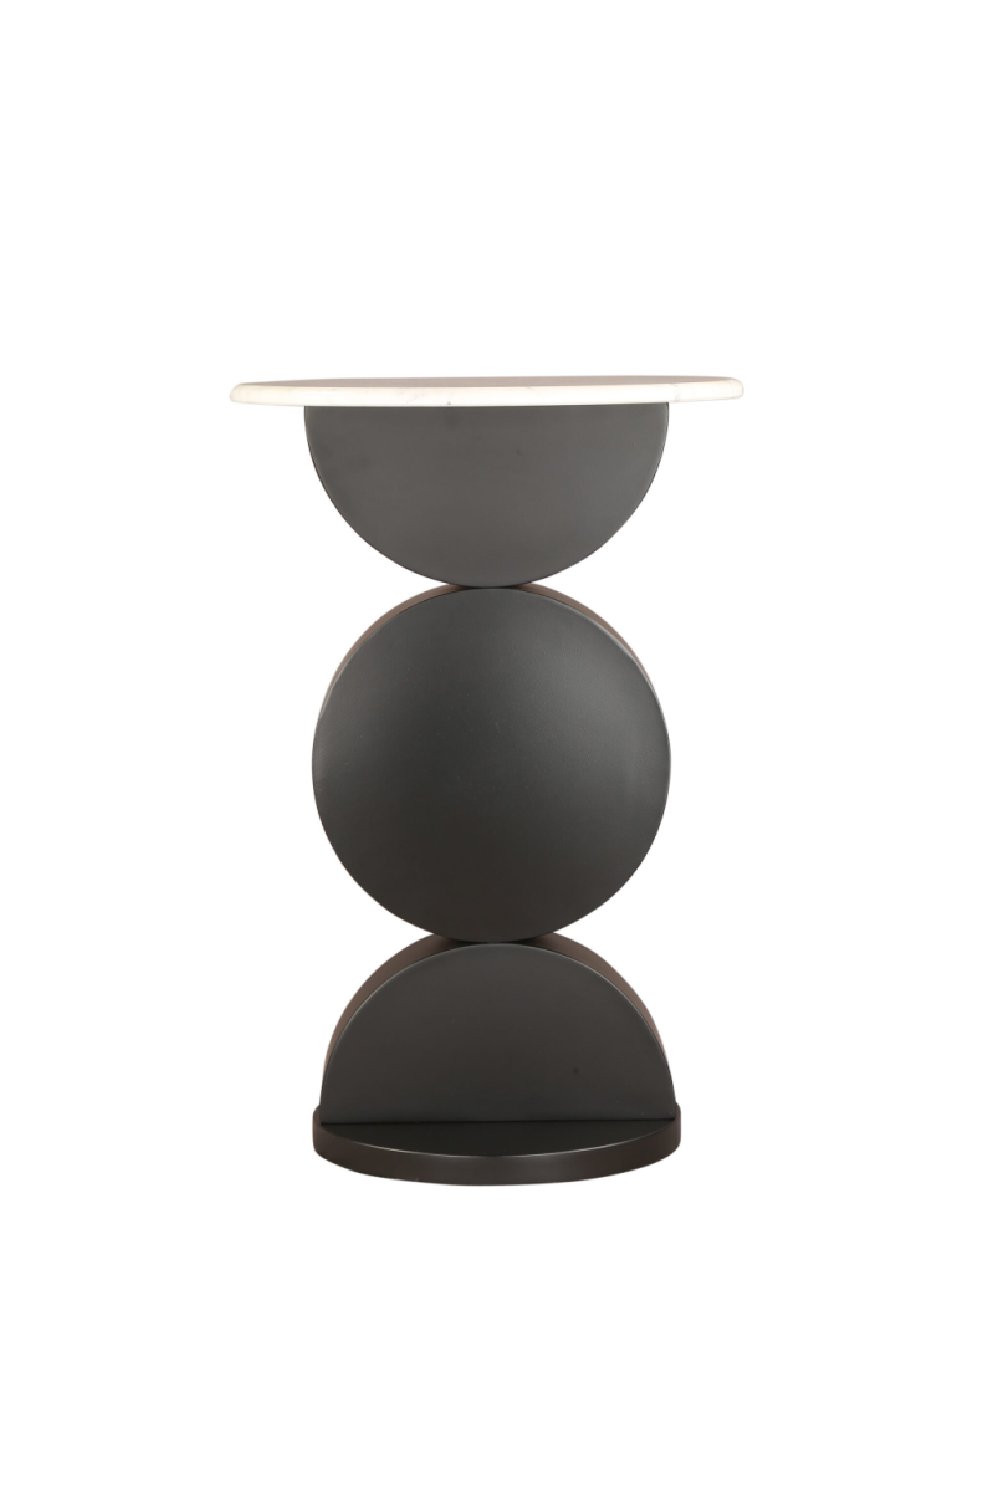 Image of Geometric Base Side Table | Liang & Eimil Pop